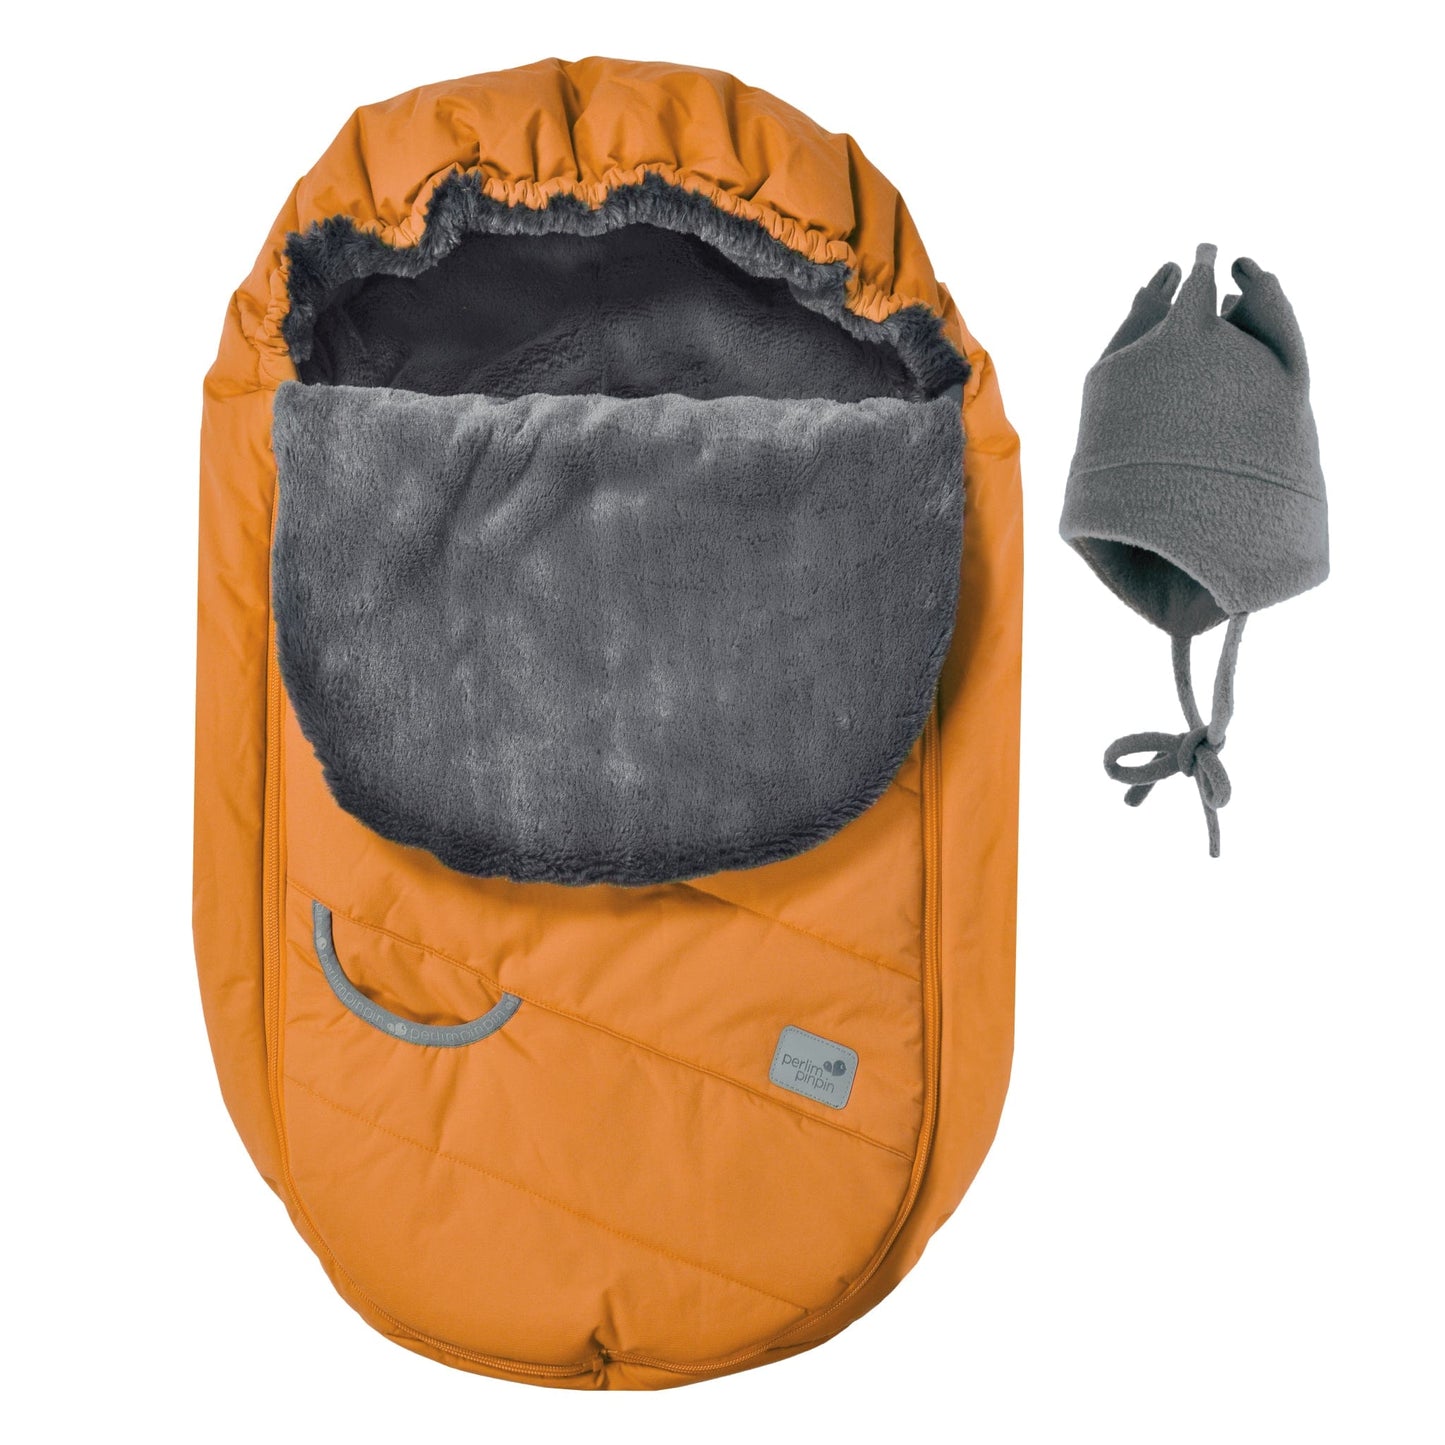 Baby car seat cover for winter - Clementine